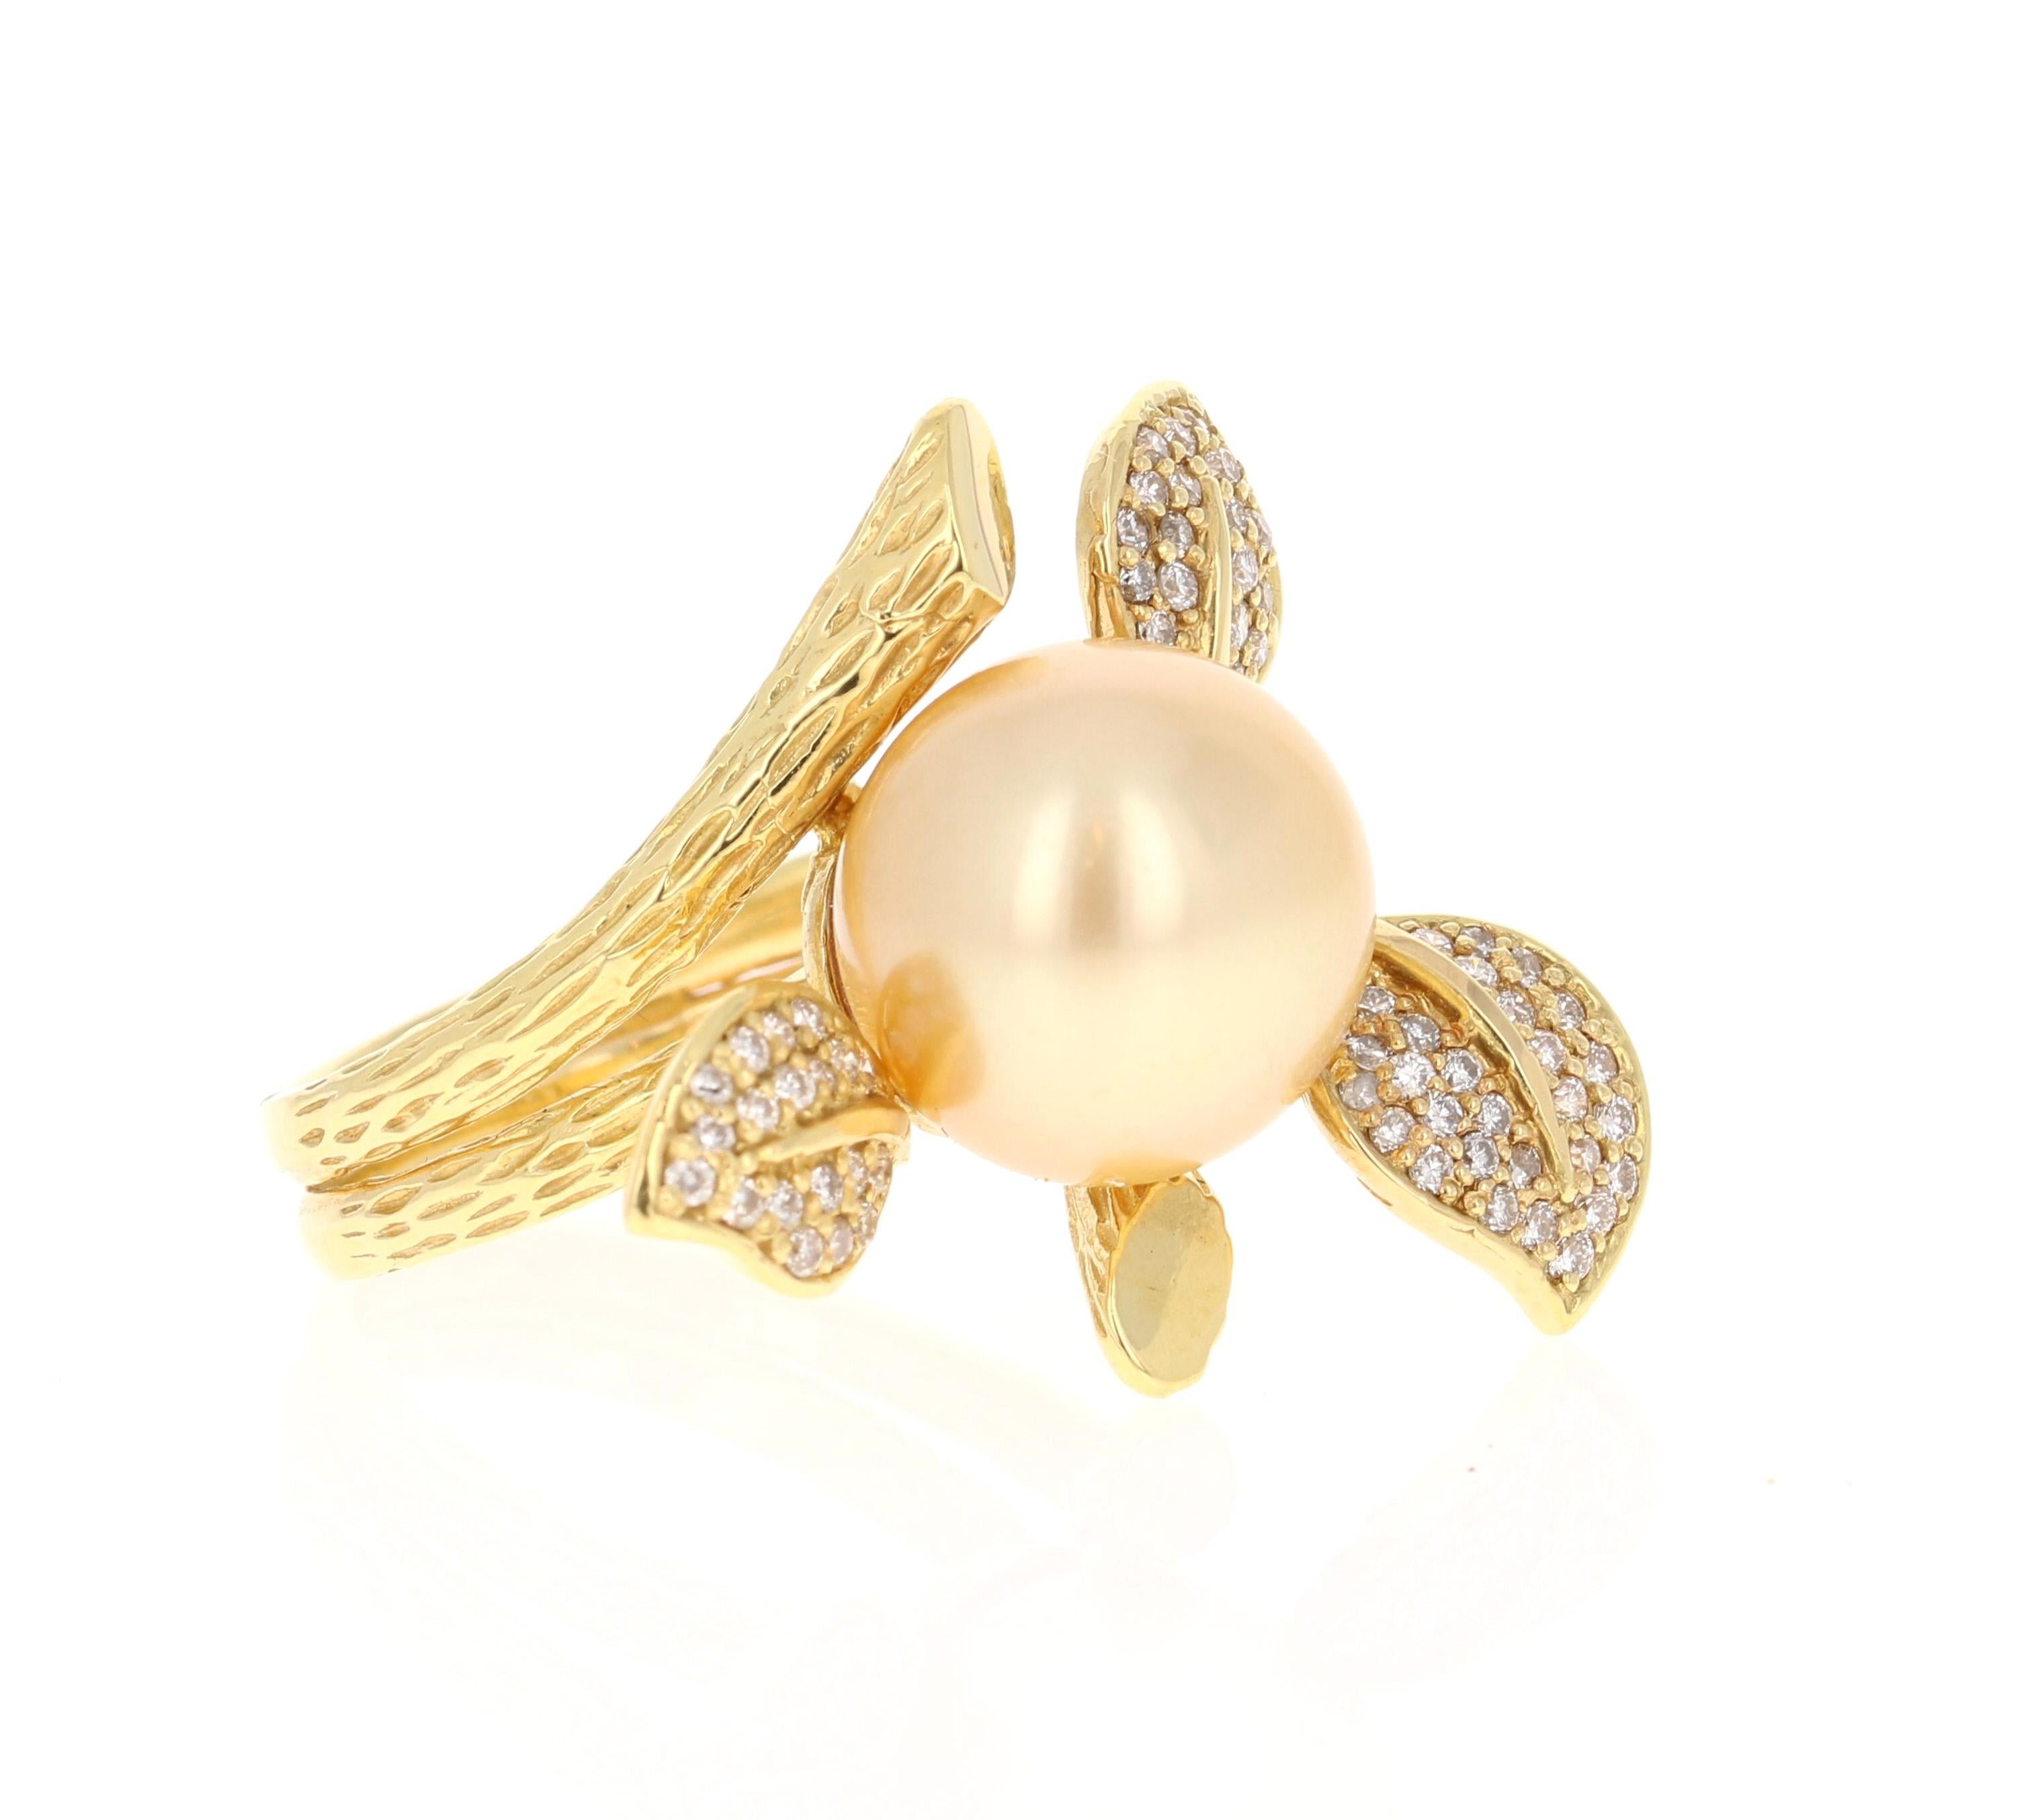 This beautiful flower petal flower rose ring is beautifull curated in 18 Karat Yellow Gold. 
There is a gorgeous 13 mm South Sea Golden Pearl and has 70 Round Cut Diamonds that weighs 0.60 Carats. (Clarity: VS, Color: F)

The gorgeous setting is